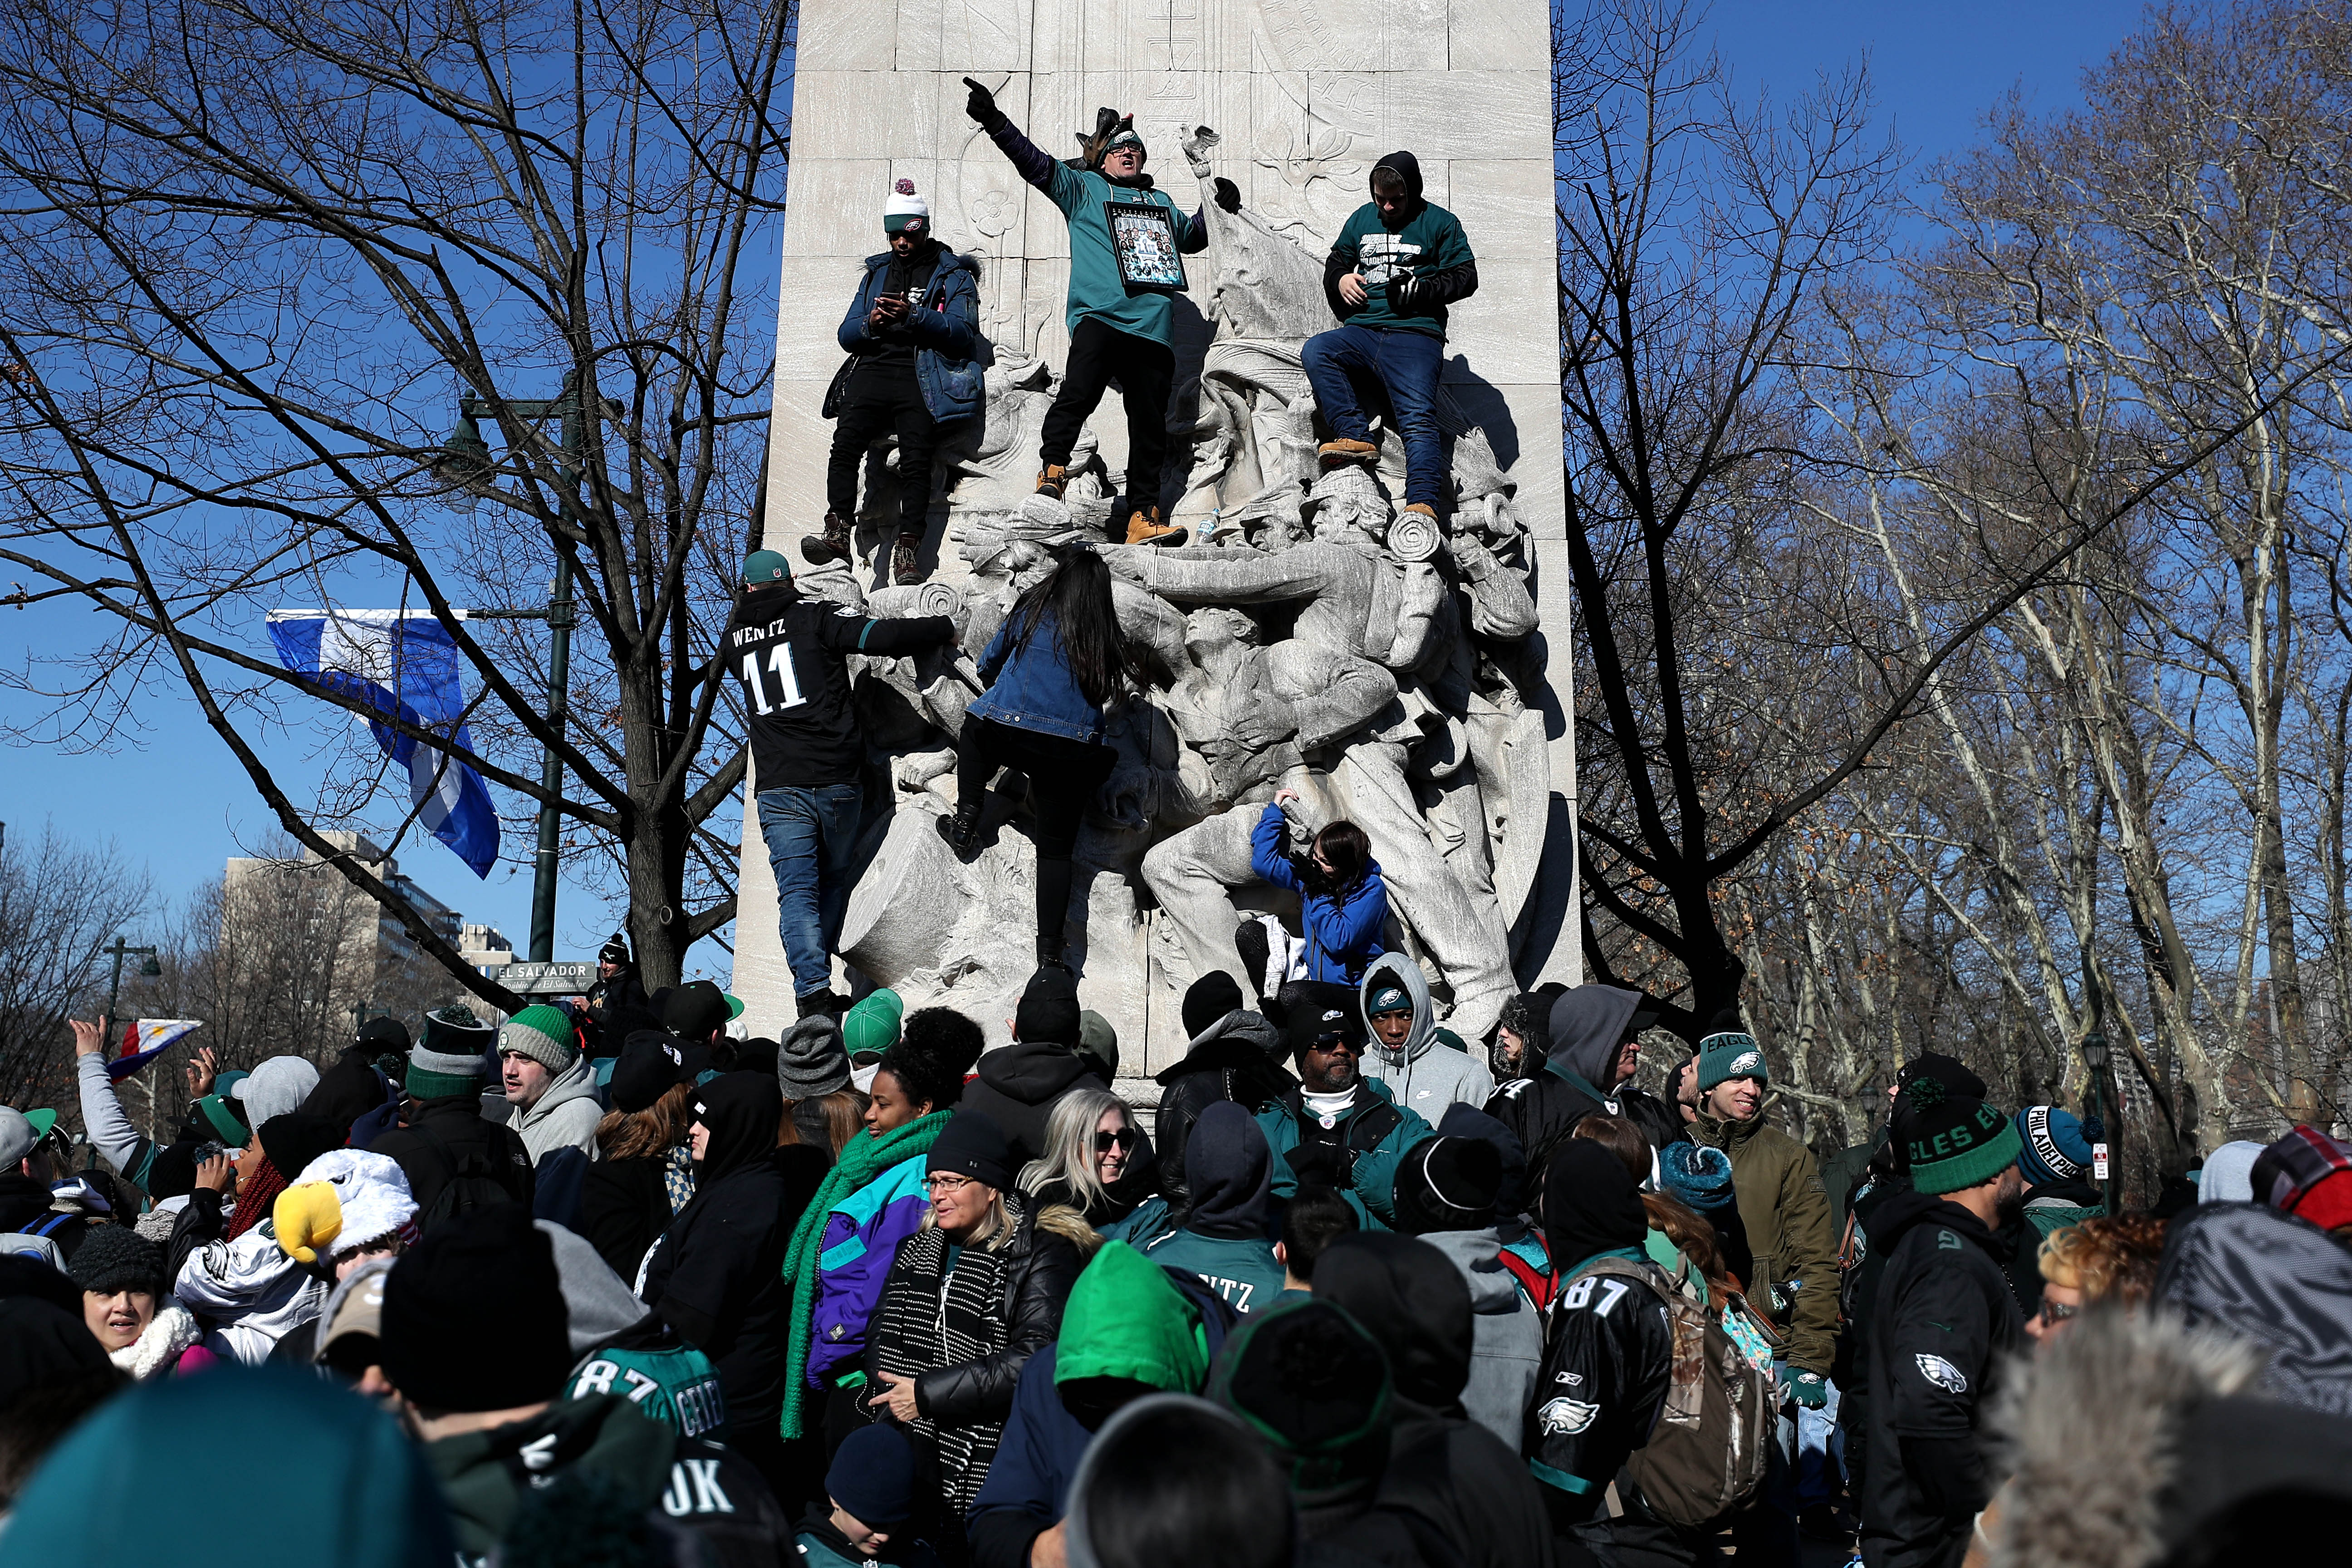 The 18 craziest scenes from the Eagles' Super Bowl parade